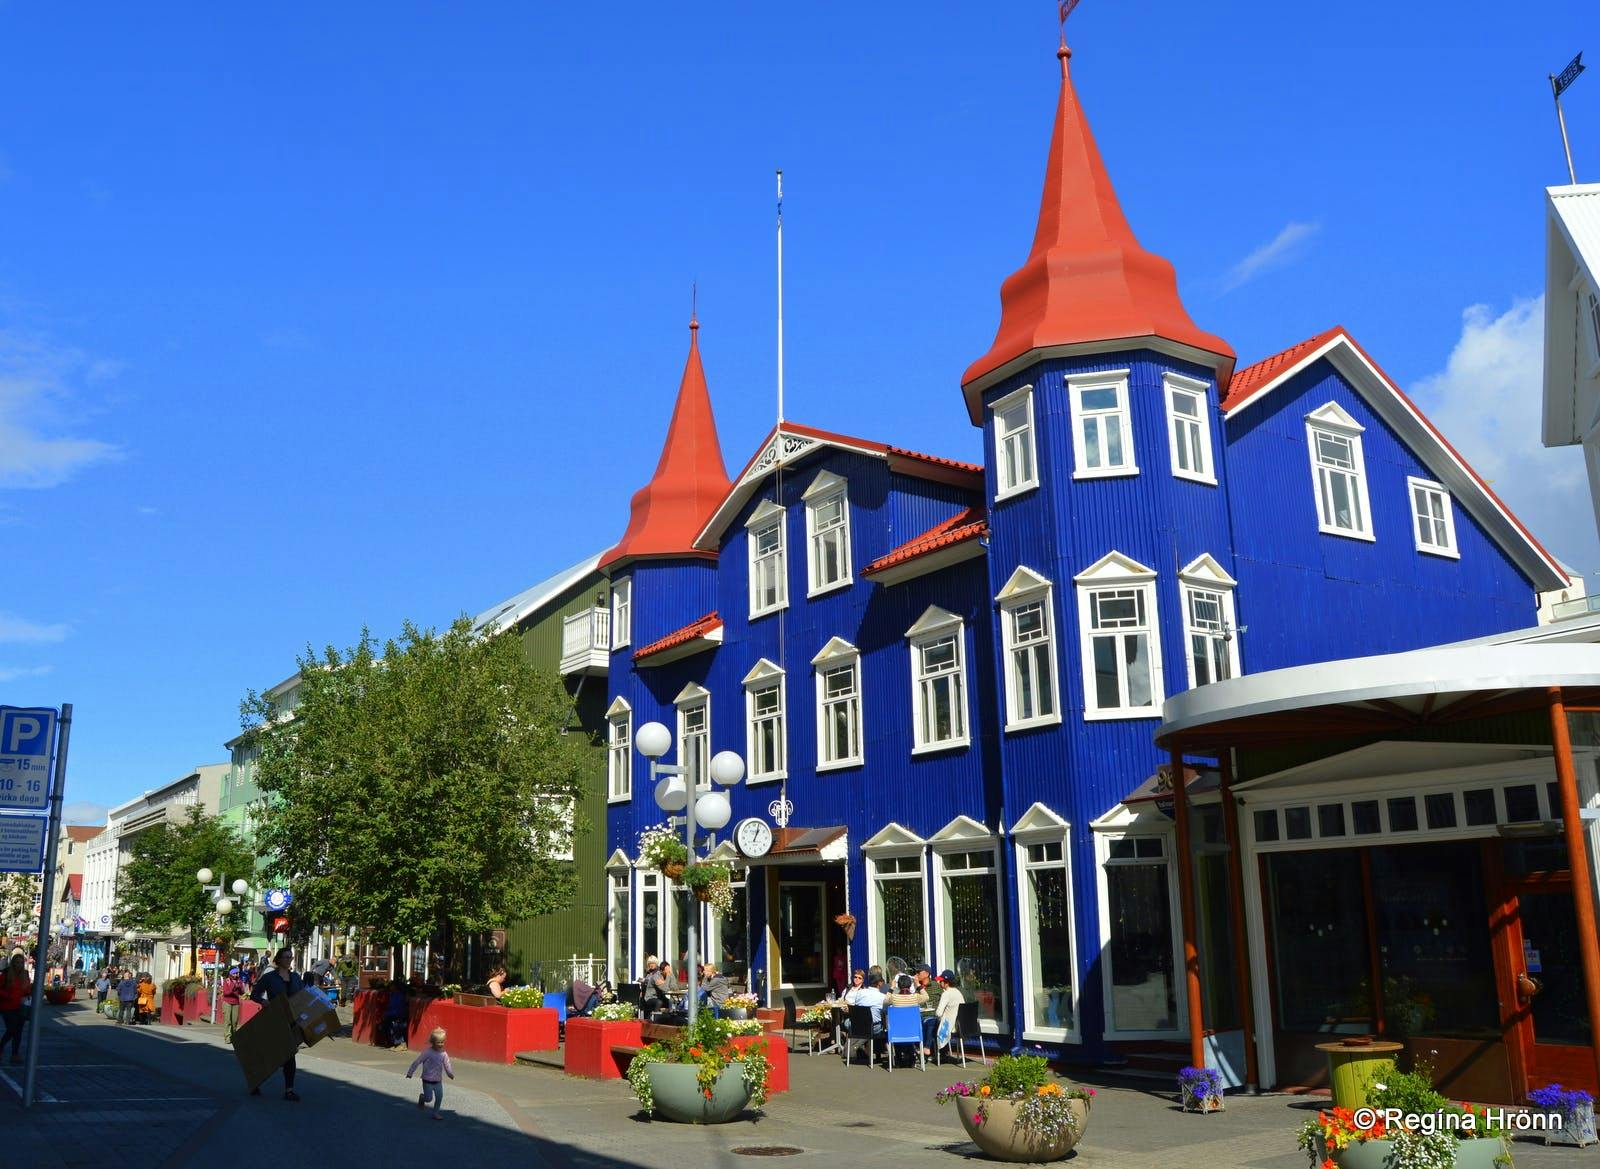 Guided 10 Day Summer Vacation Package of Iceland's Complete Ring Road with Free Days in Reykjavik - day 8